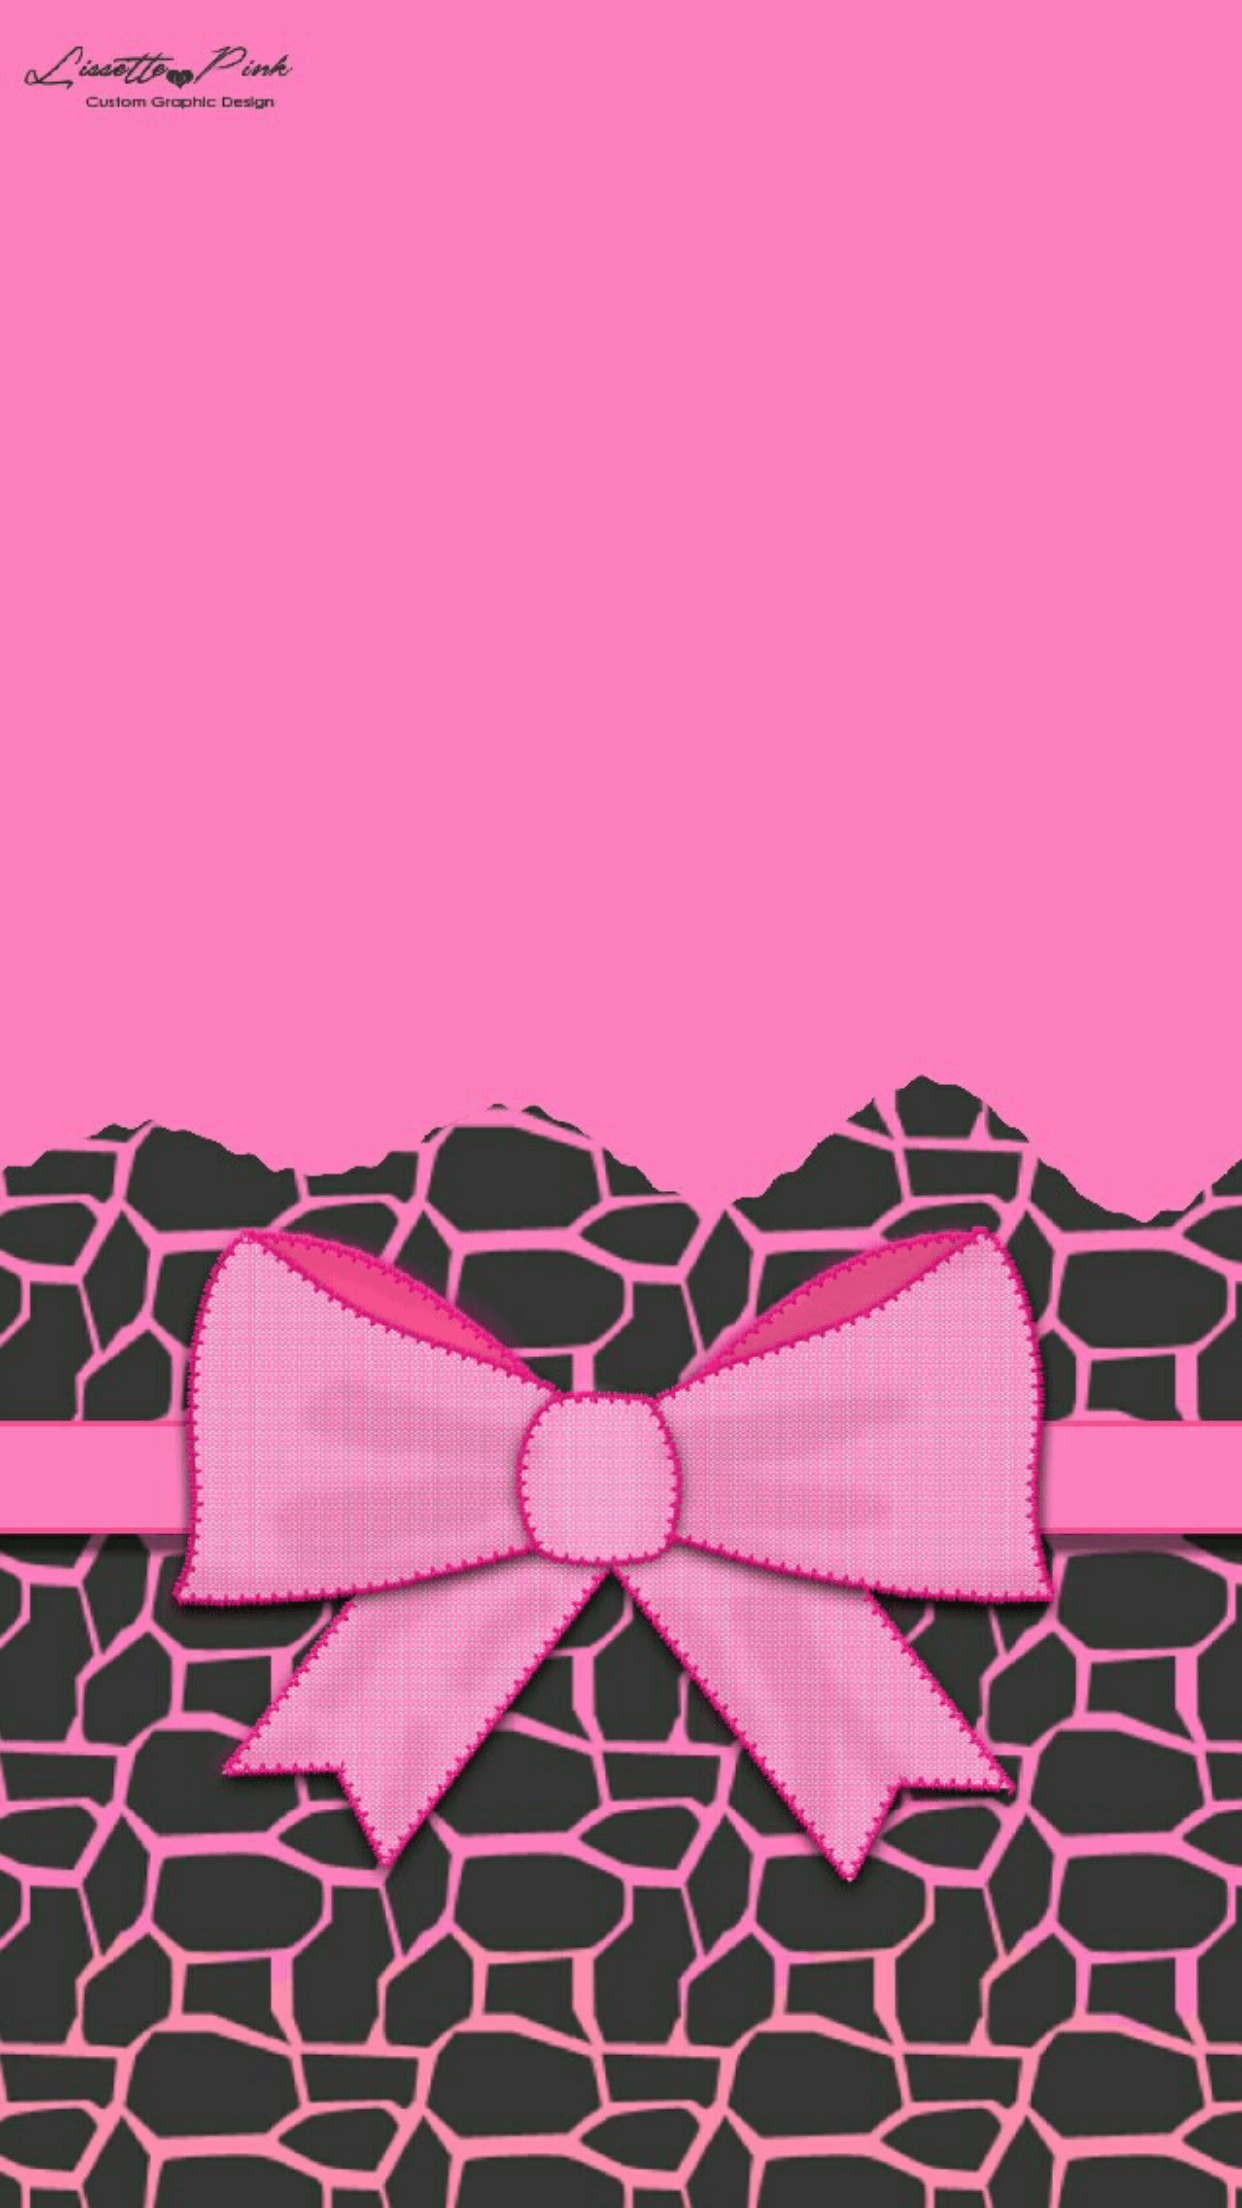 bow wallpaper. Lace wallpaper, Pink